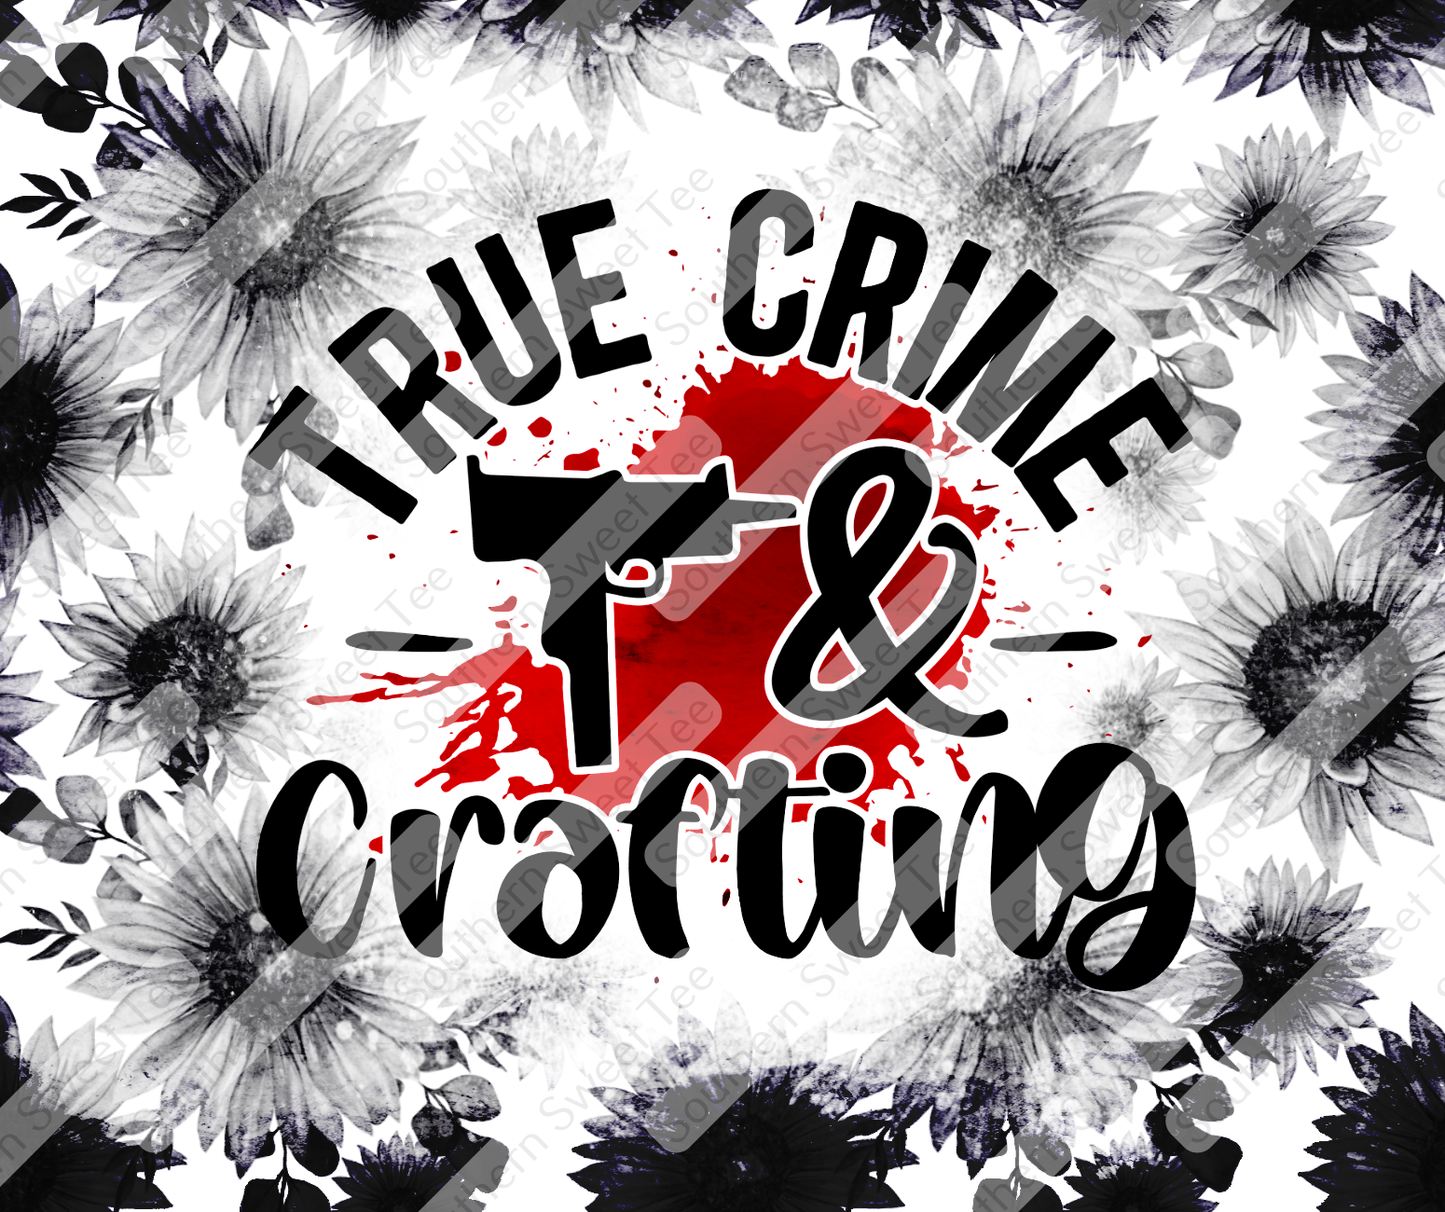 20oz true crime and crafting .tfvd/june